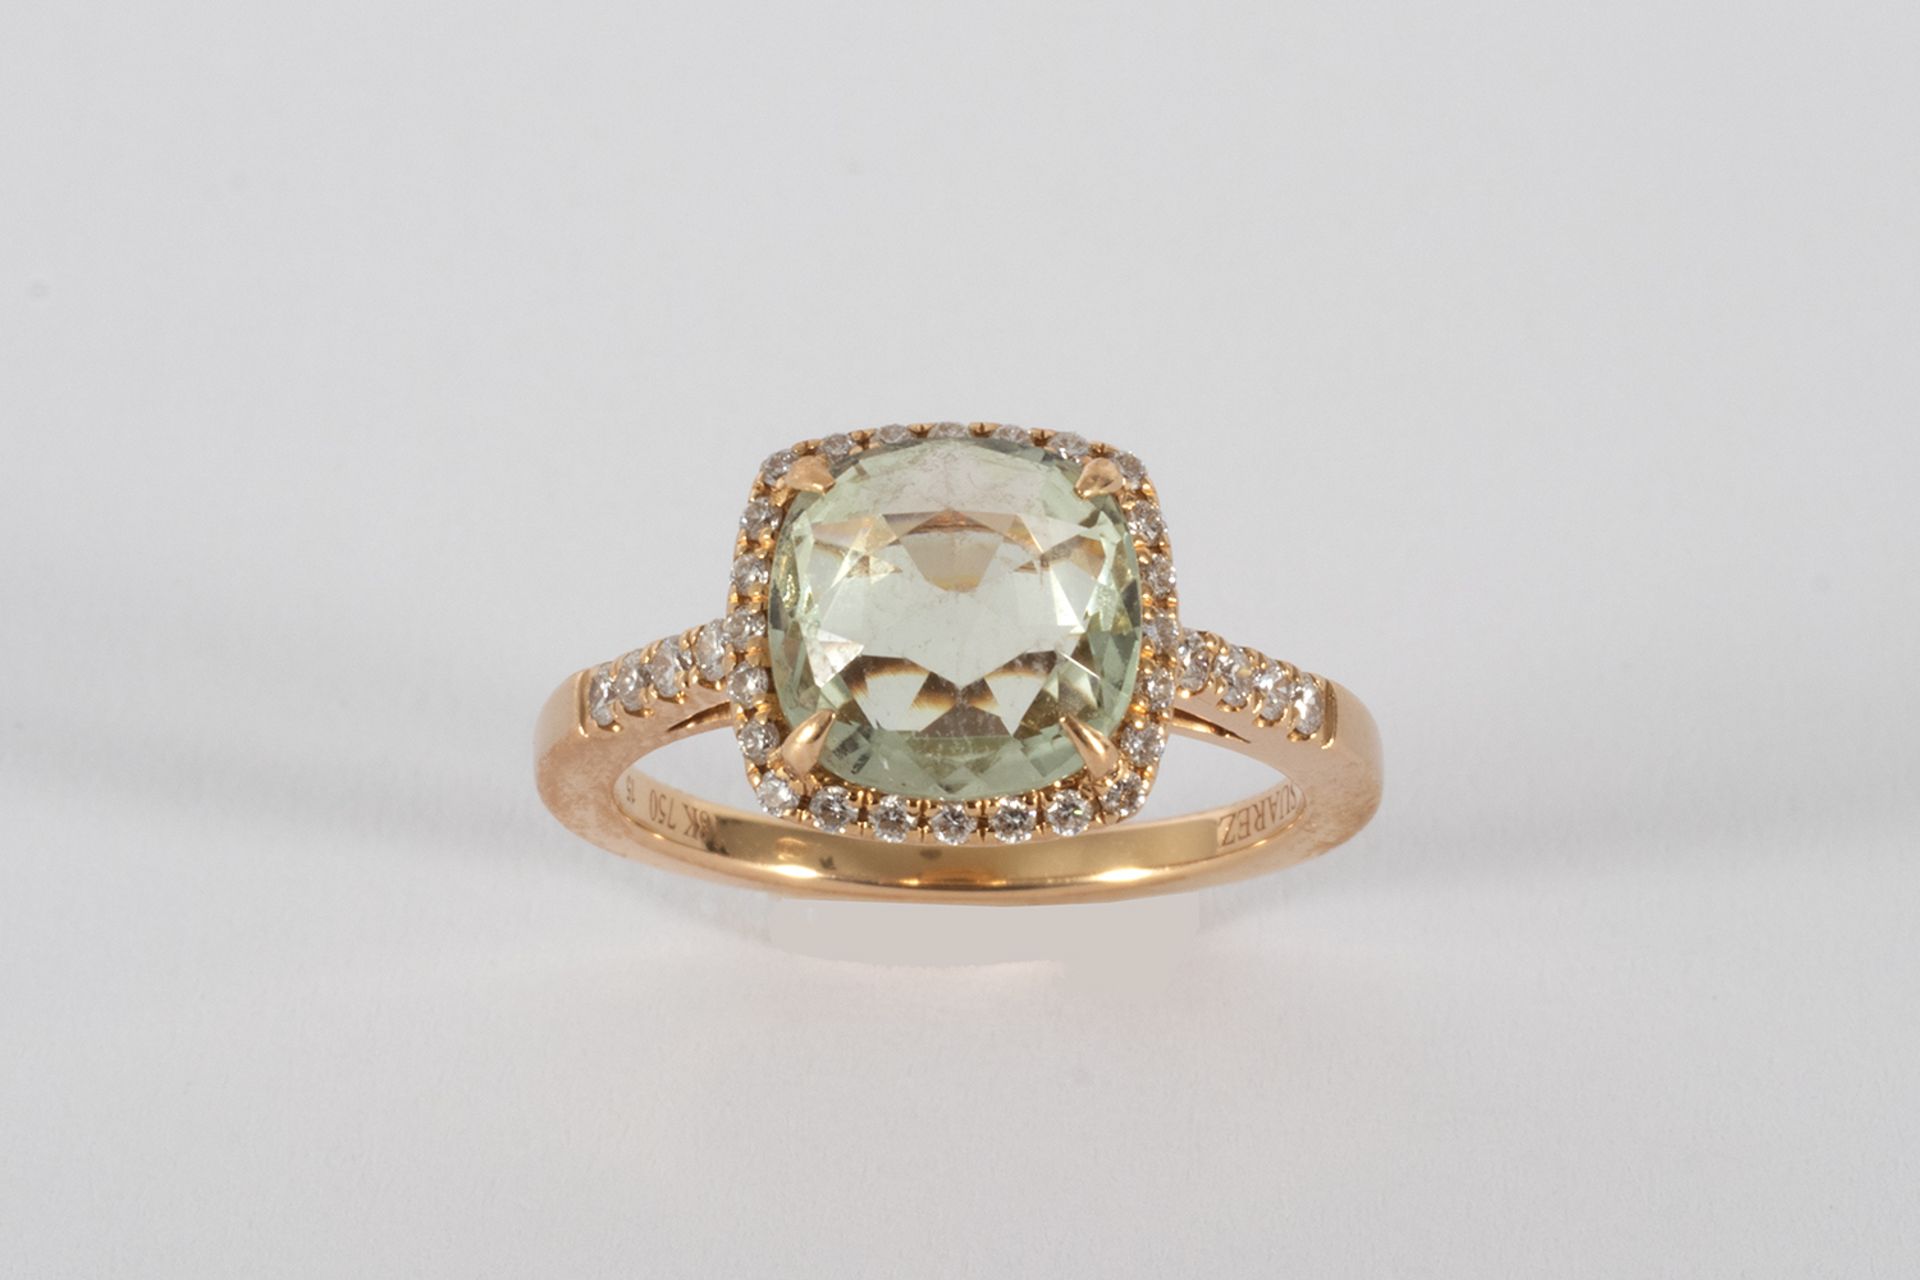 Gold ring with aquamarine and brilliant cut diamonds from the Suárez firm.